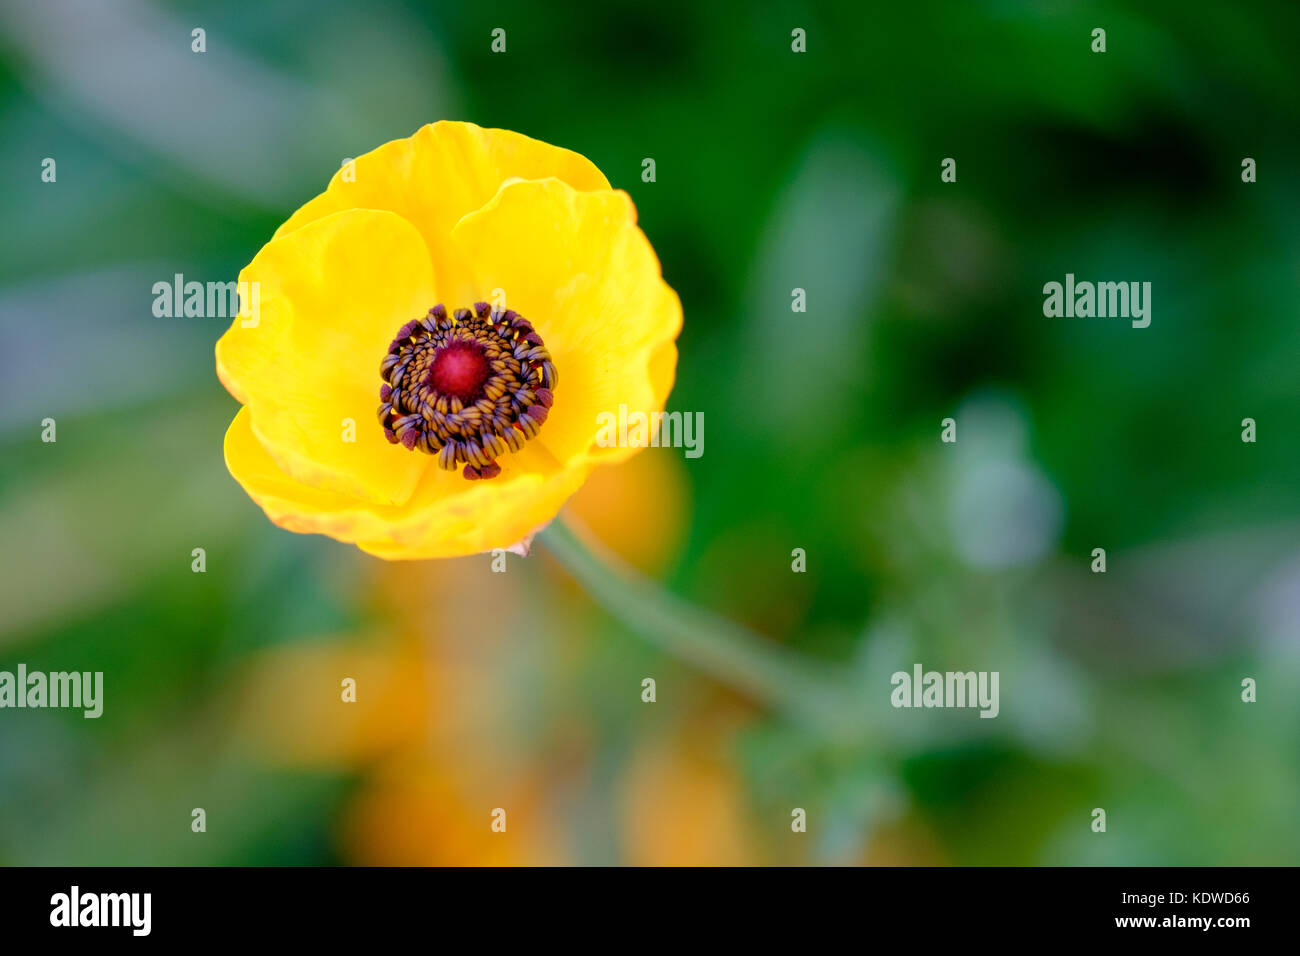 Close up image of a single yellow turban buttercup (Ranunculus asiaticus)  flower in full bloom Stock Photo